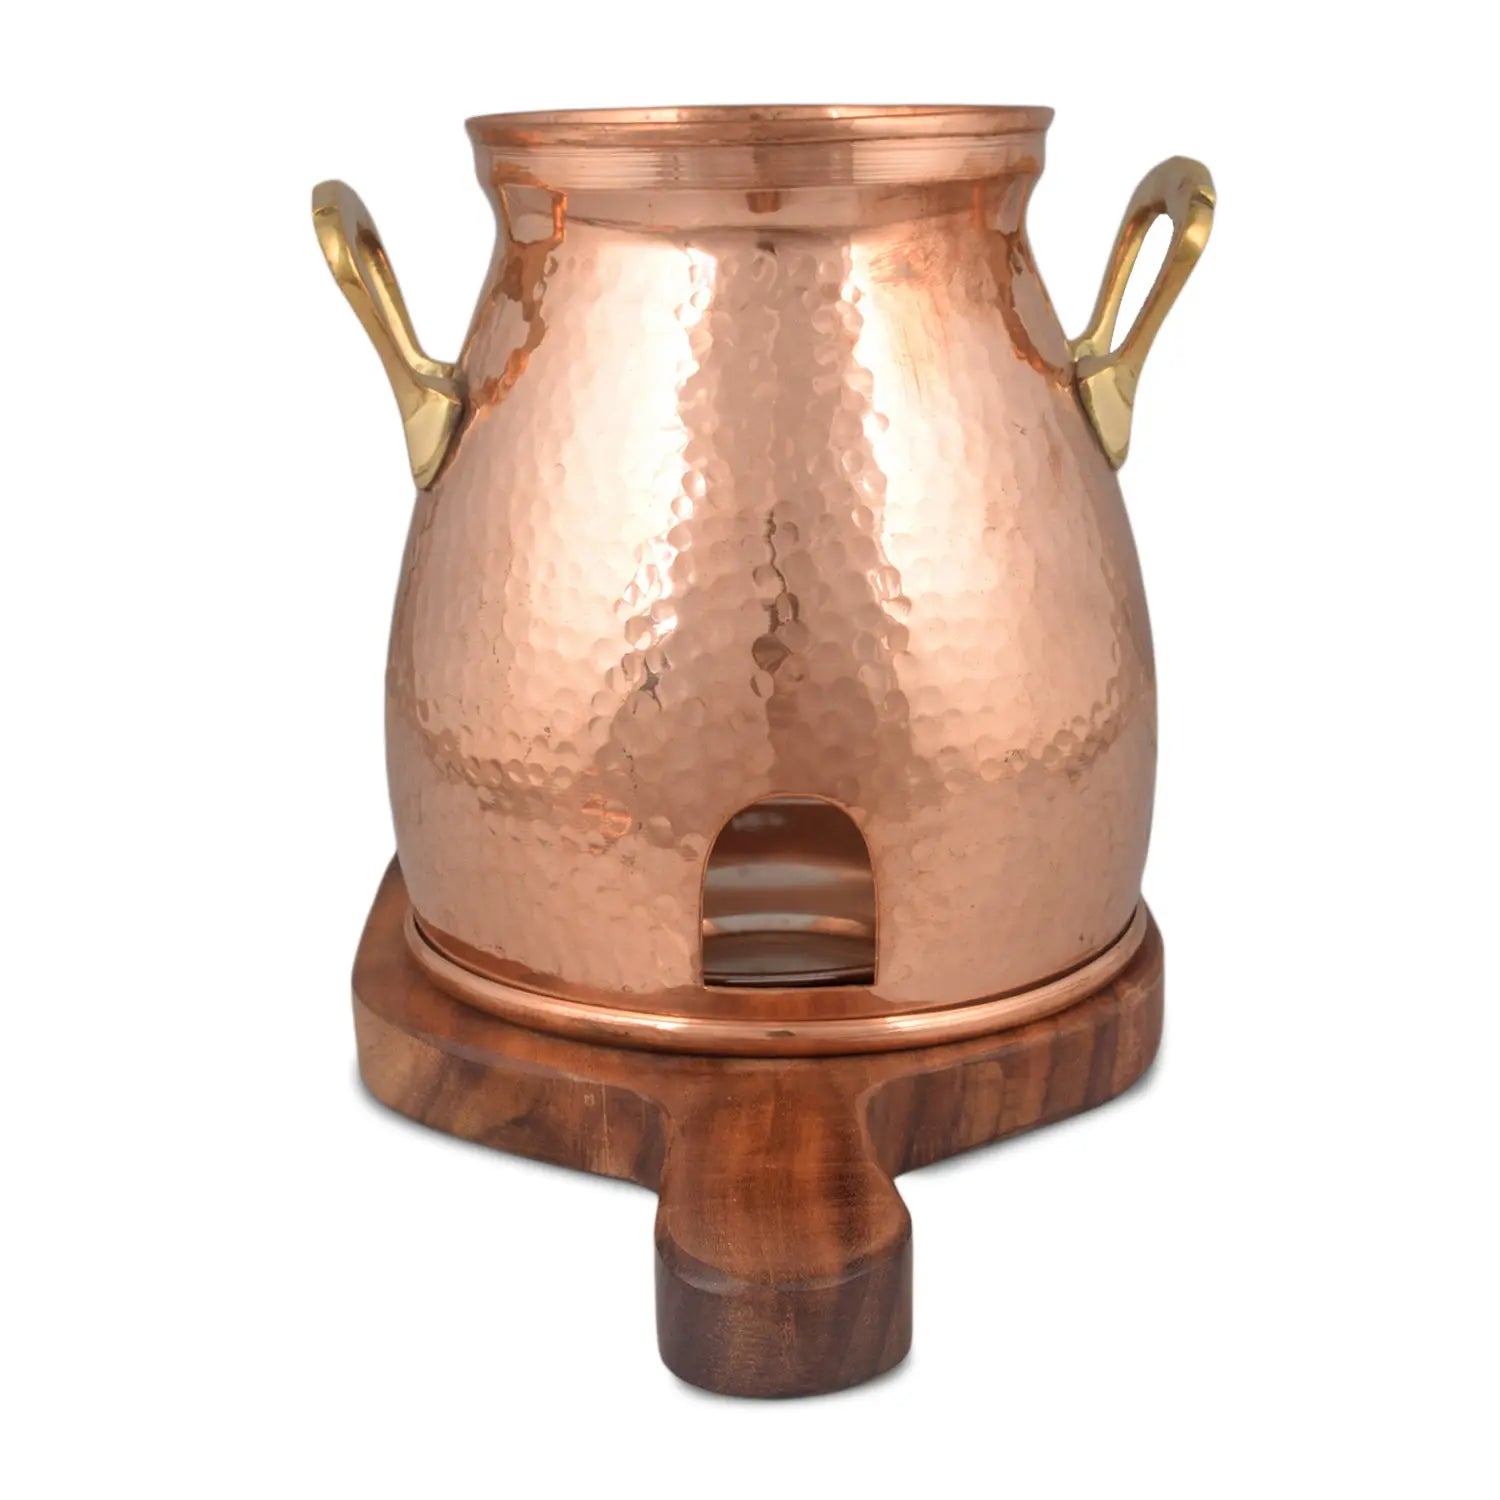 Copper Table Tandoor Set with Wooden Base with 3 barbeque Skewers and 1 Steel Plate - CROCKERY WALA AND COMPANY 